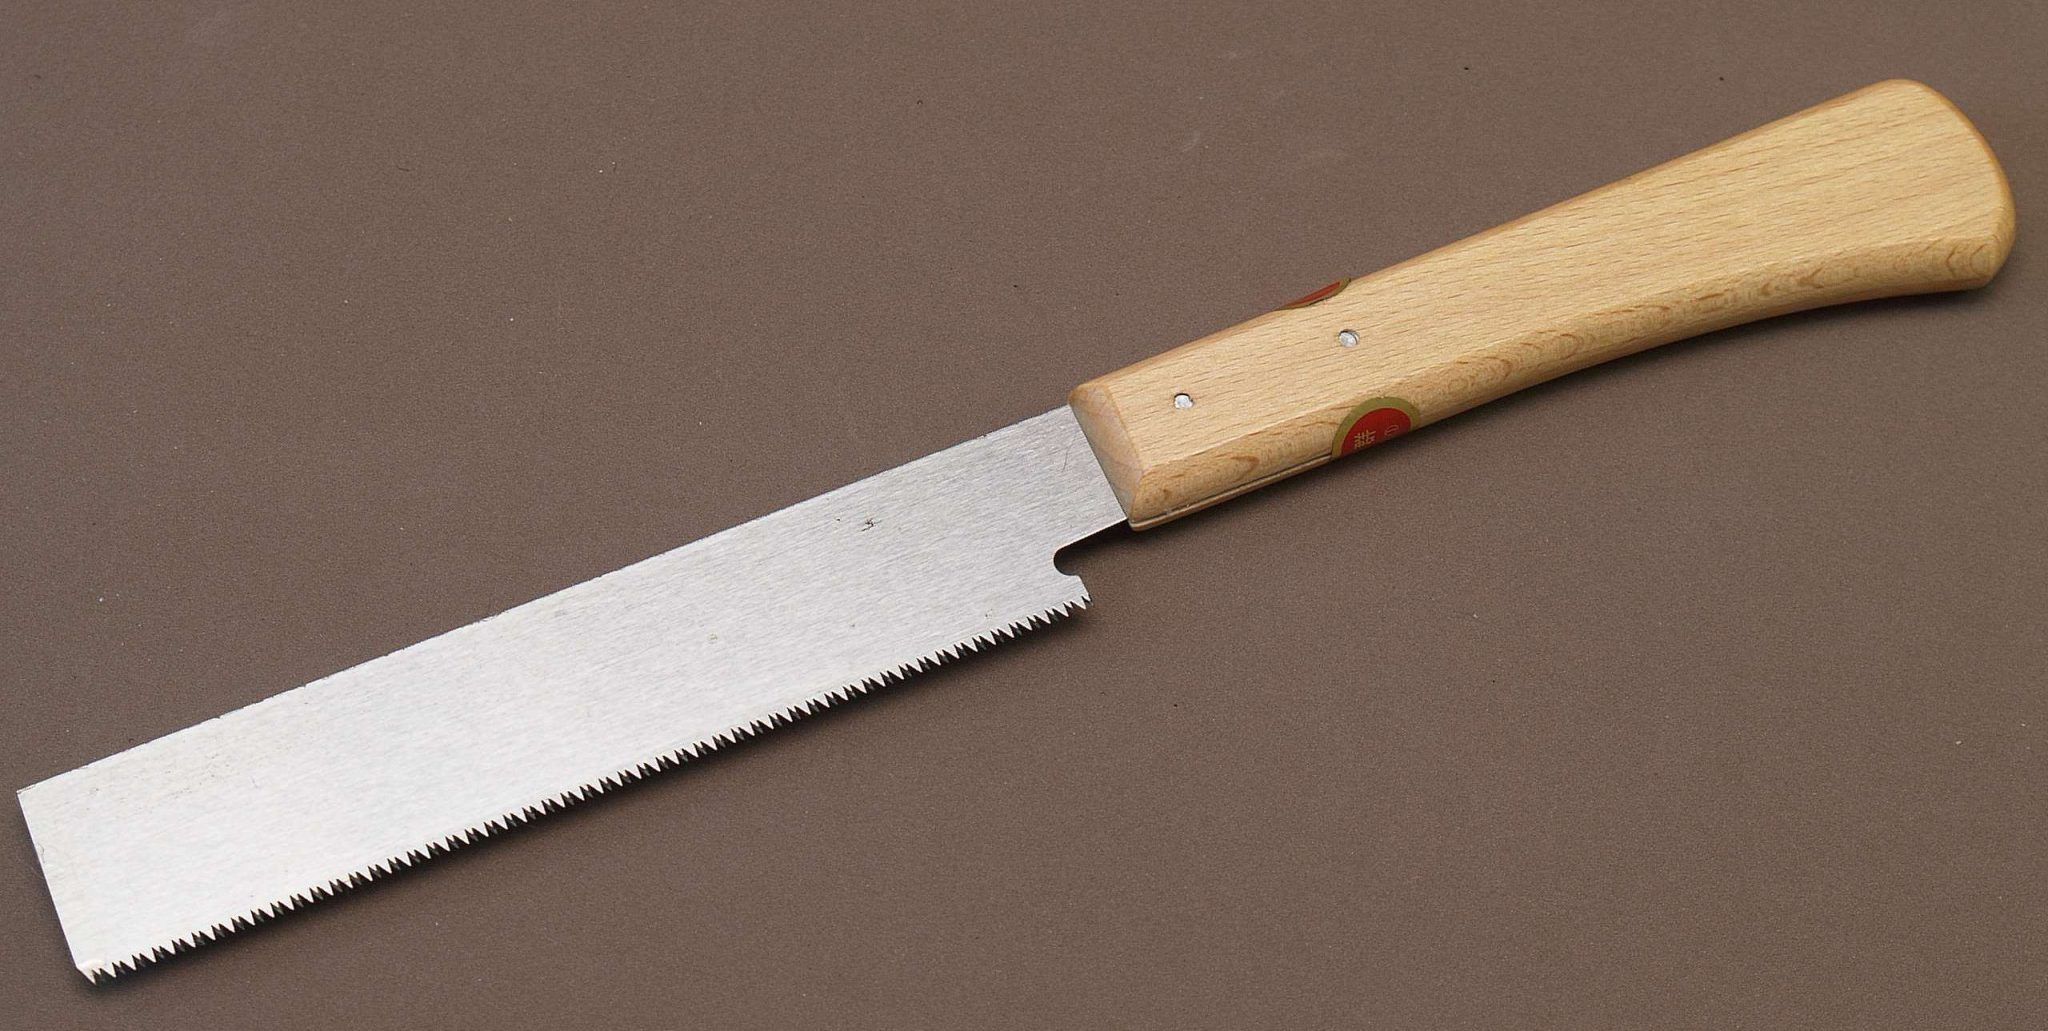 15 Tools Every Woodworker Needs